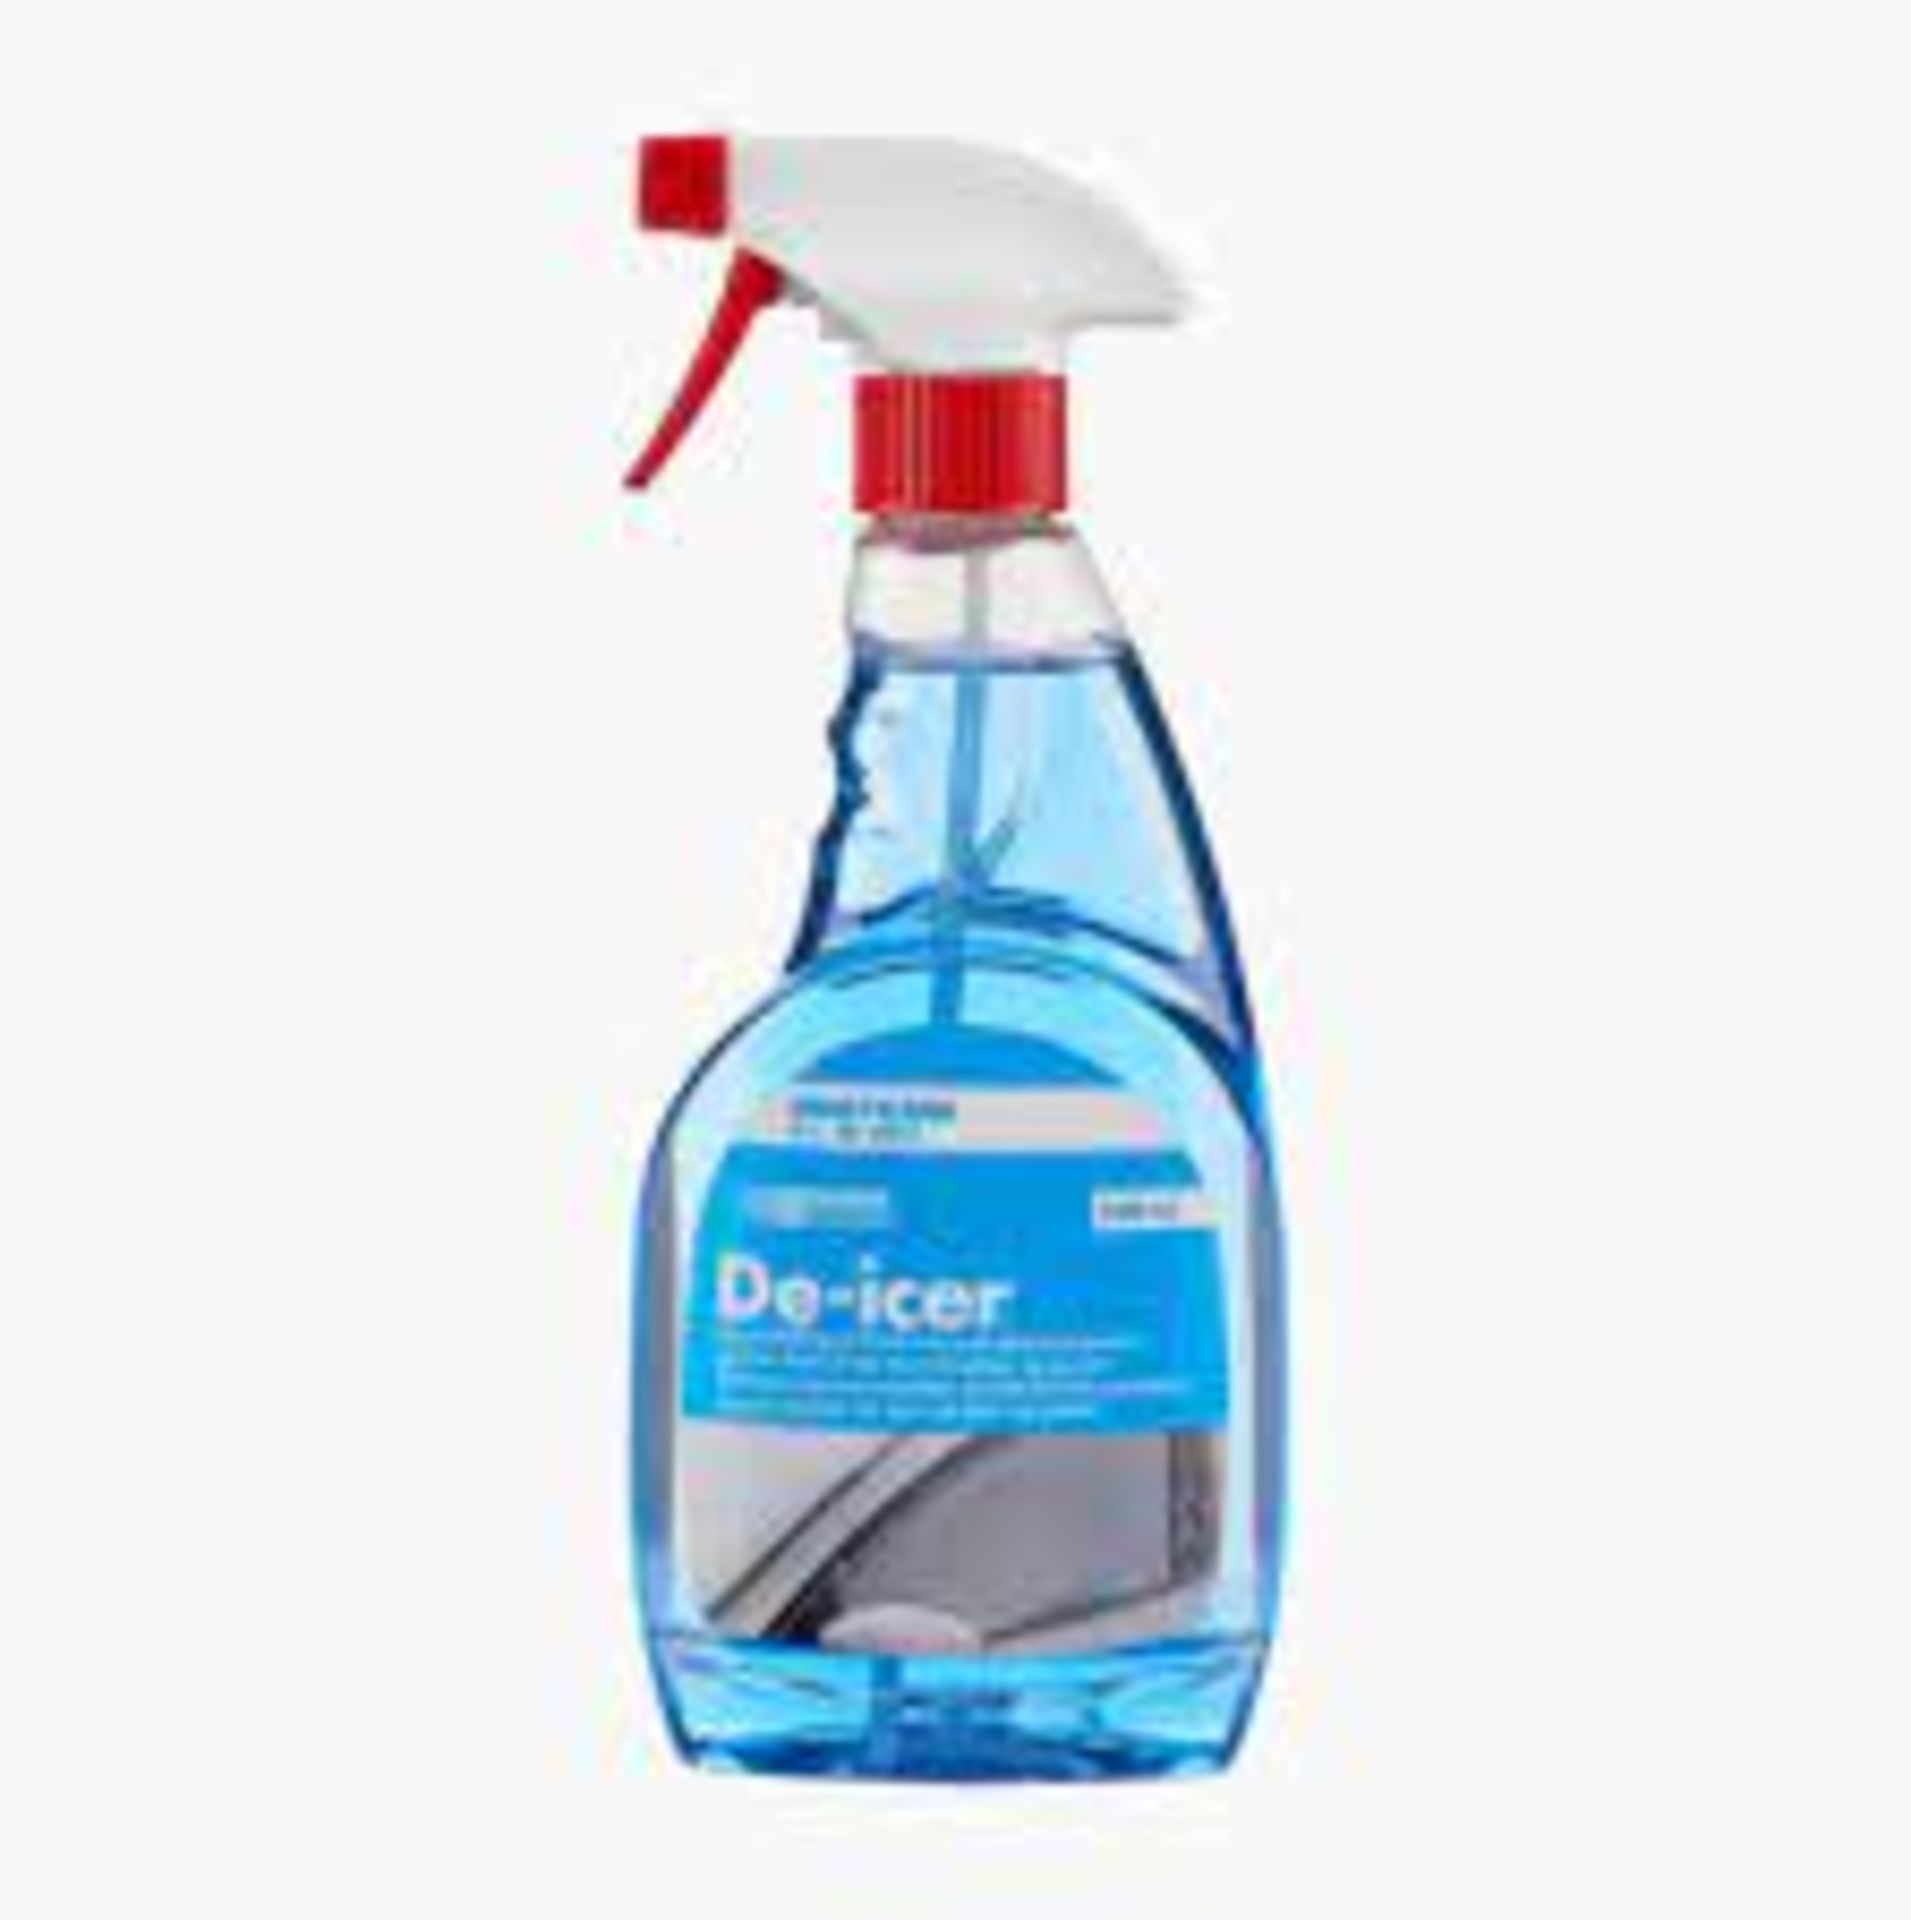 PALLET TO CONTAIN 240 x NEW 500ML BILTEMA SUPER CLEAR DE-ICER WITH TRIGGER SPRAY BOTTLES. RRP £4.